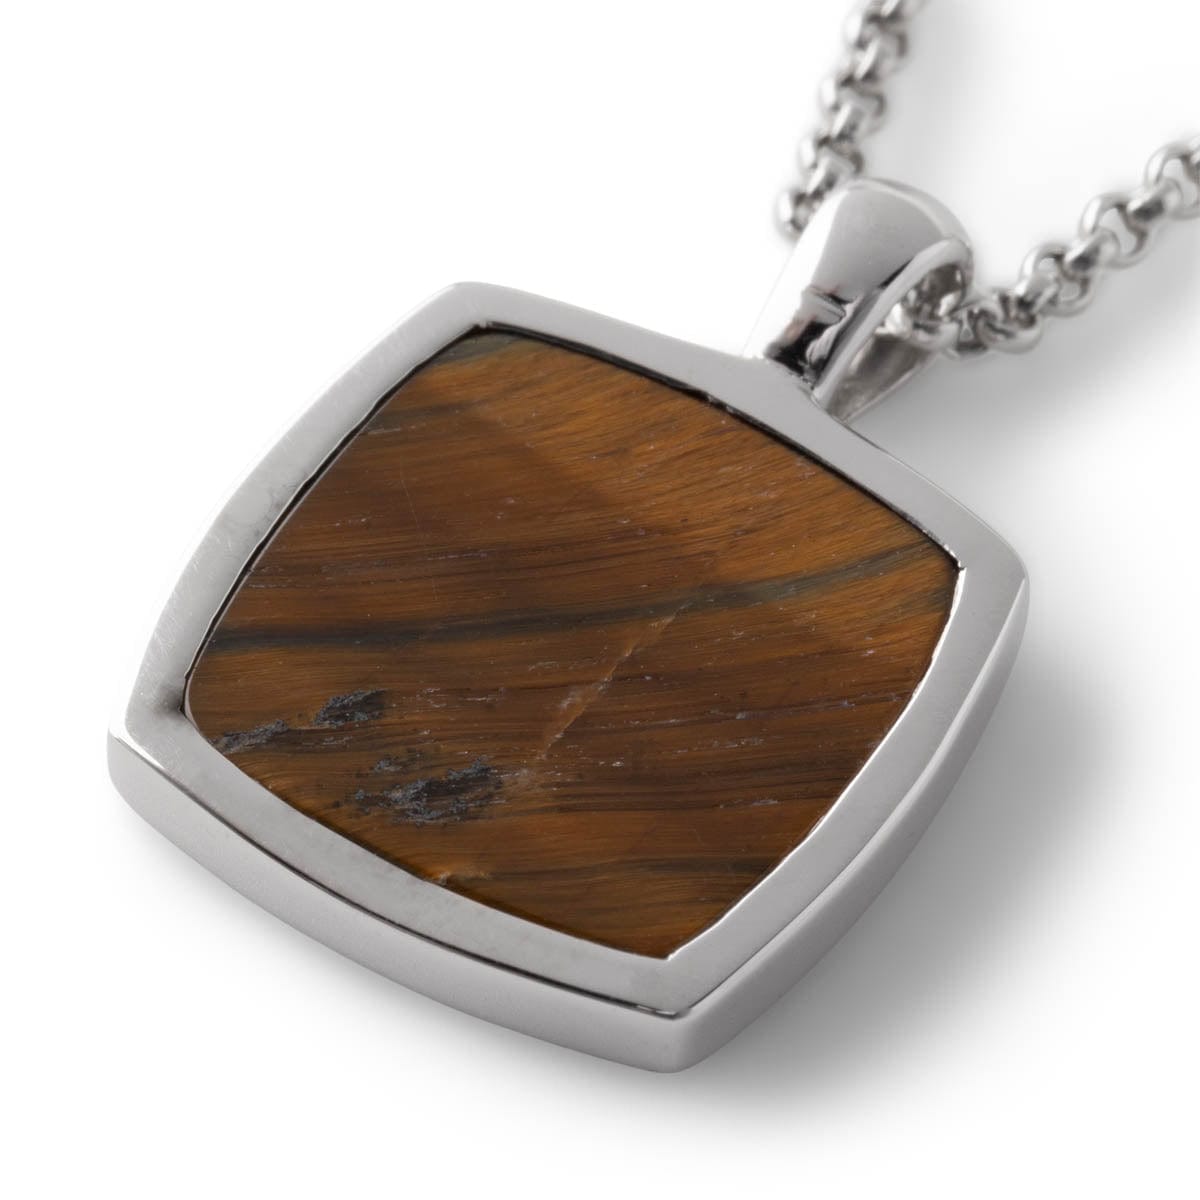 Tom Wood Jewelry 925 STERLING SILVER / O/S CUSHION PENDANT TIGER EYE